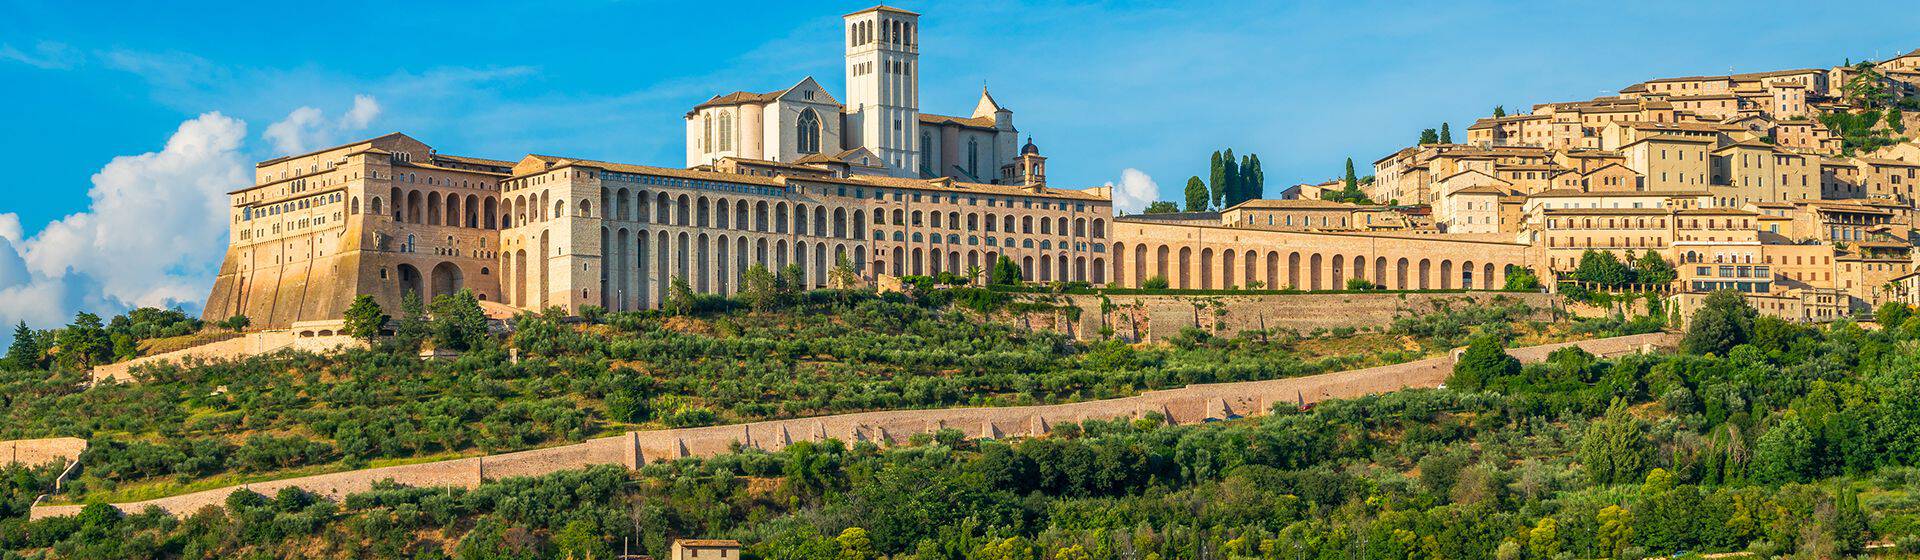 Holidays to Assisi Image